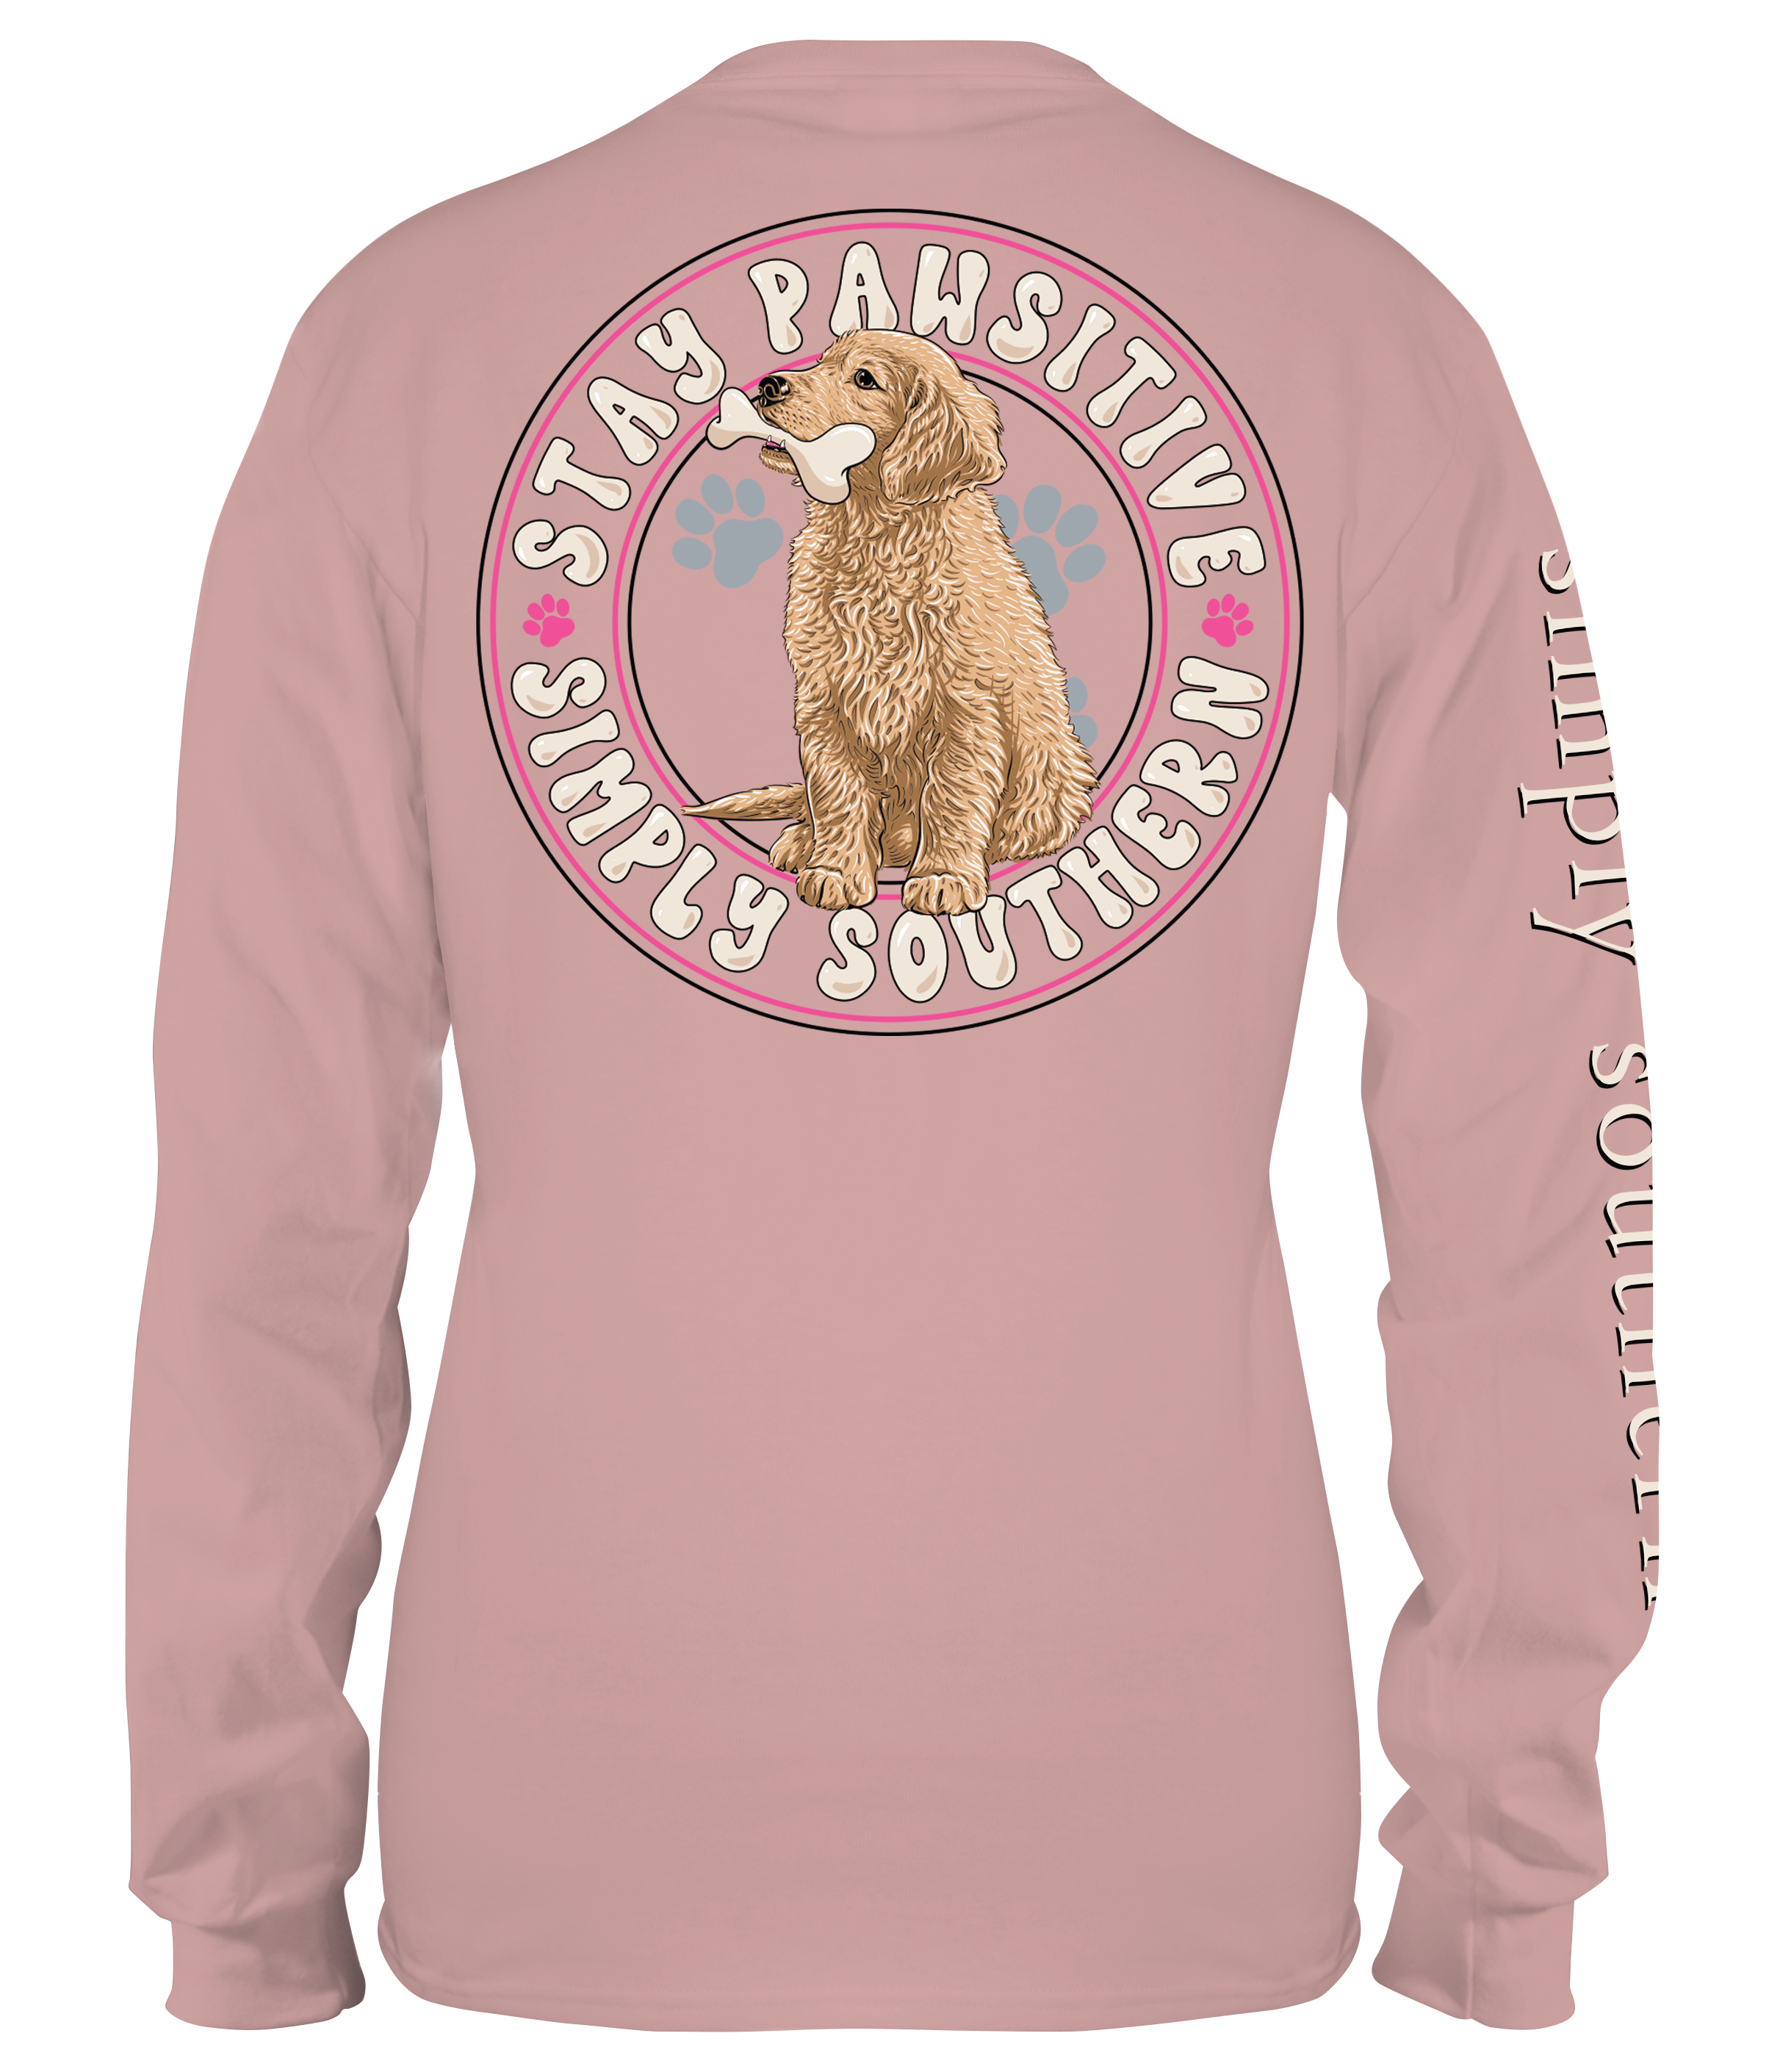 'Stay Pawsitive' Puppy Long Sleeve Tee by Simply Southern